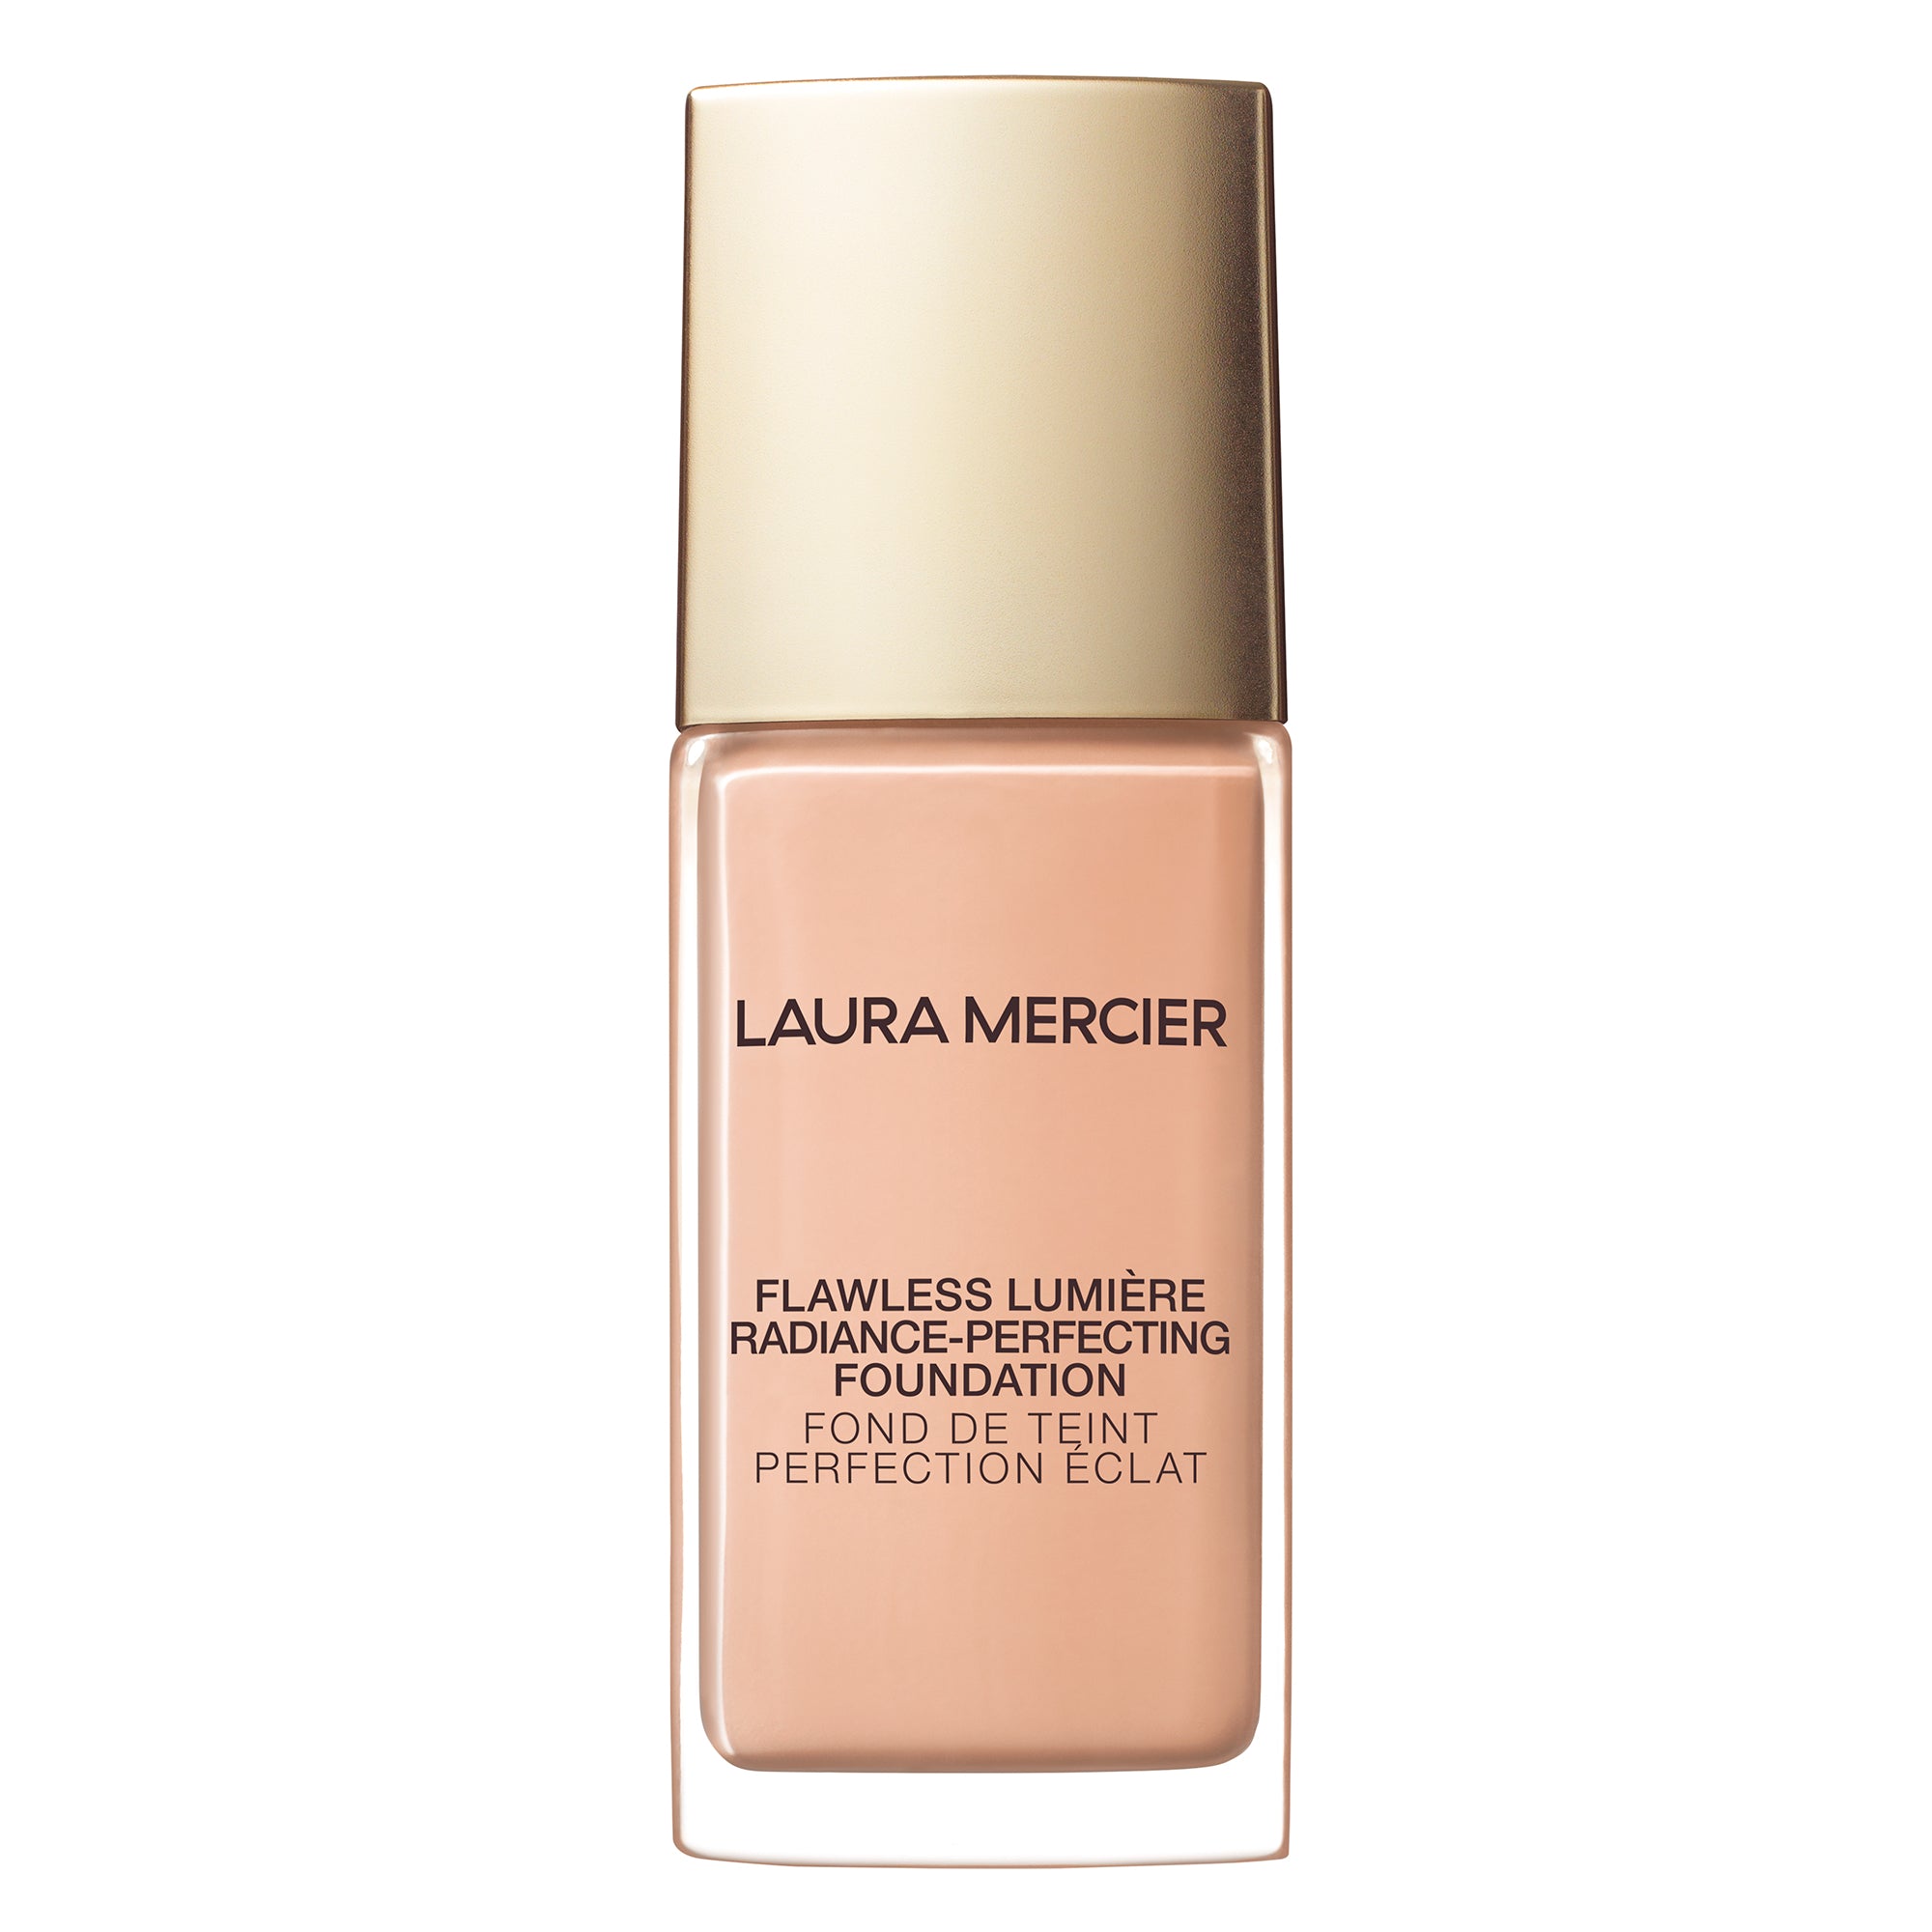 Flawless Lumière Radiance Perfecting Foundation View 1